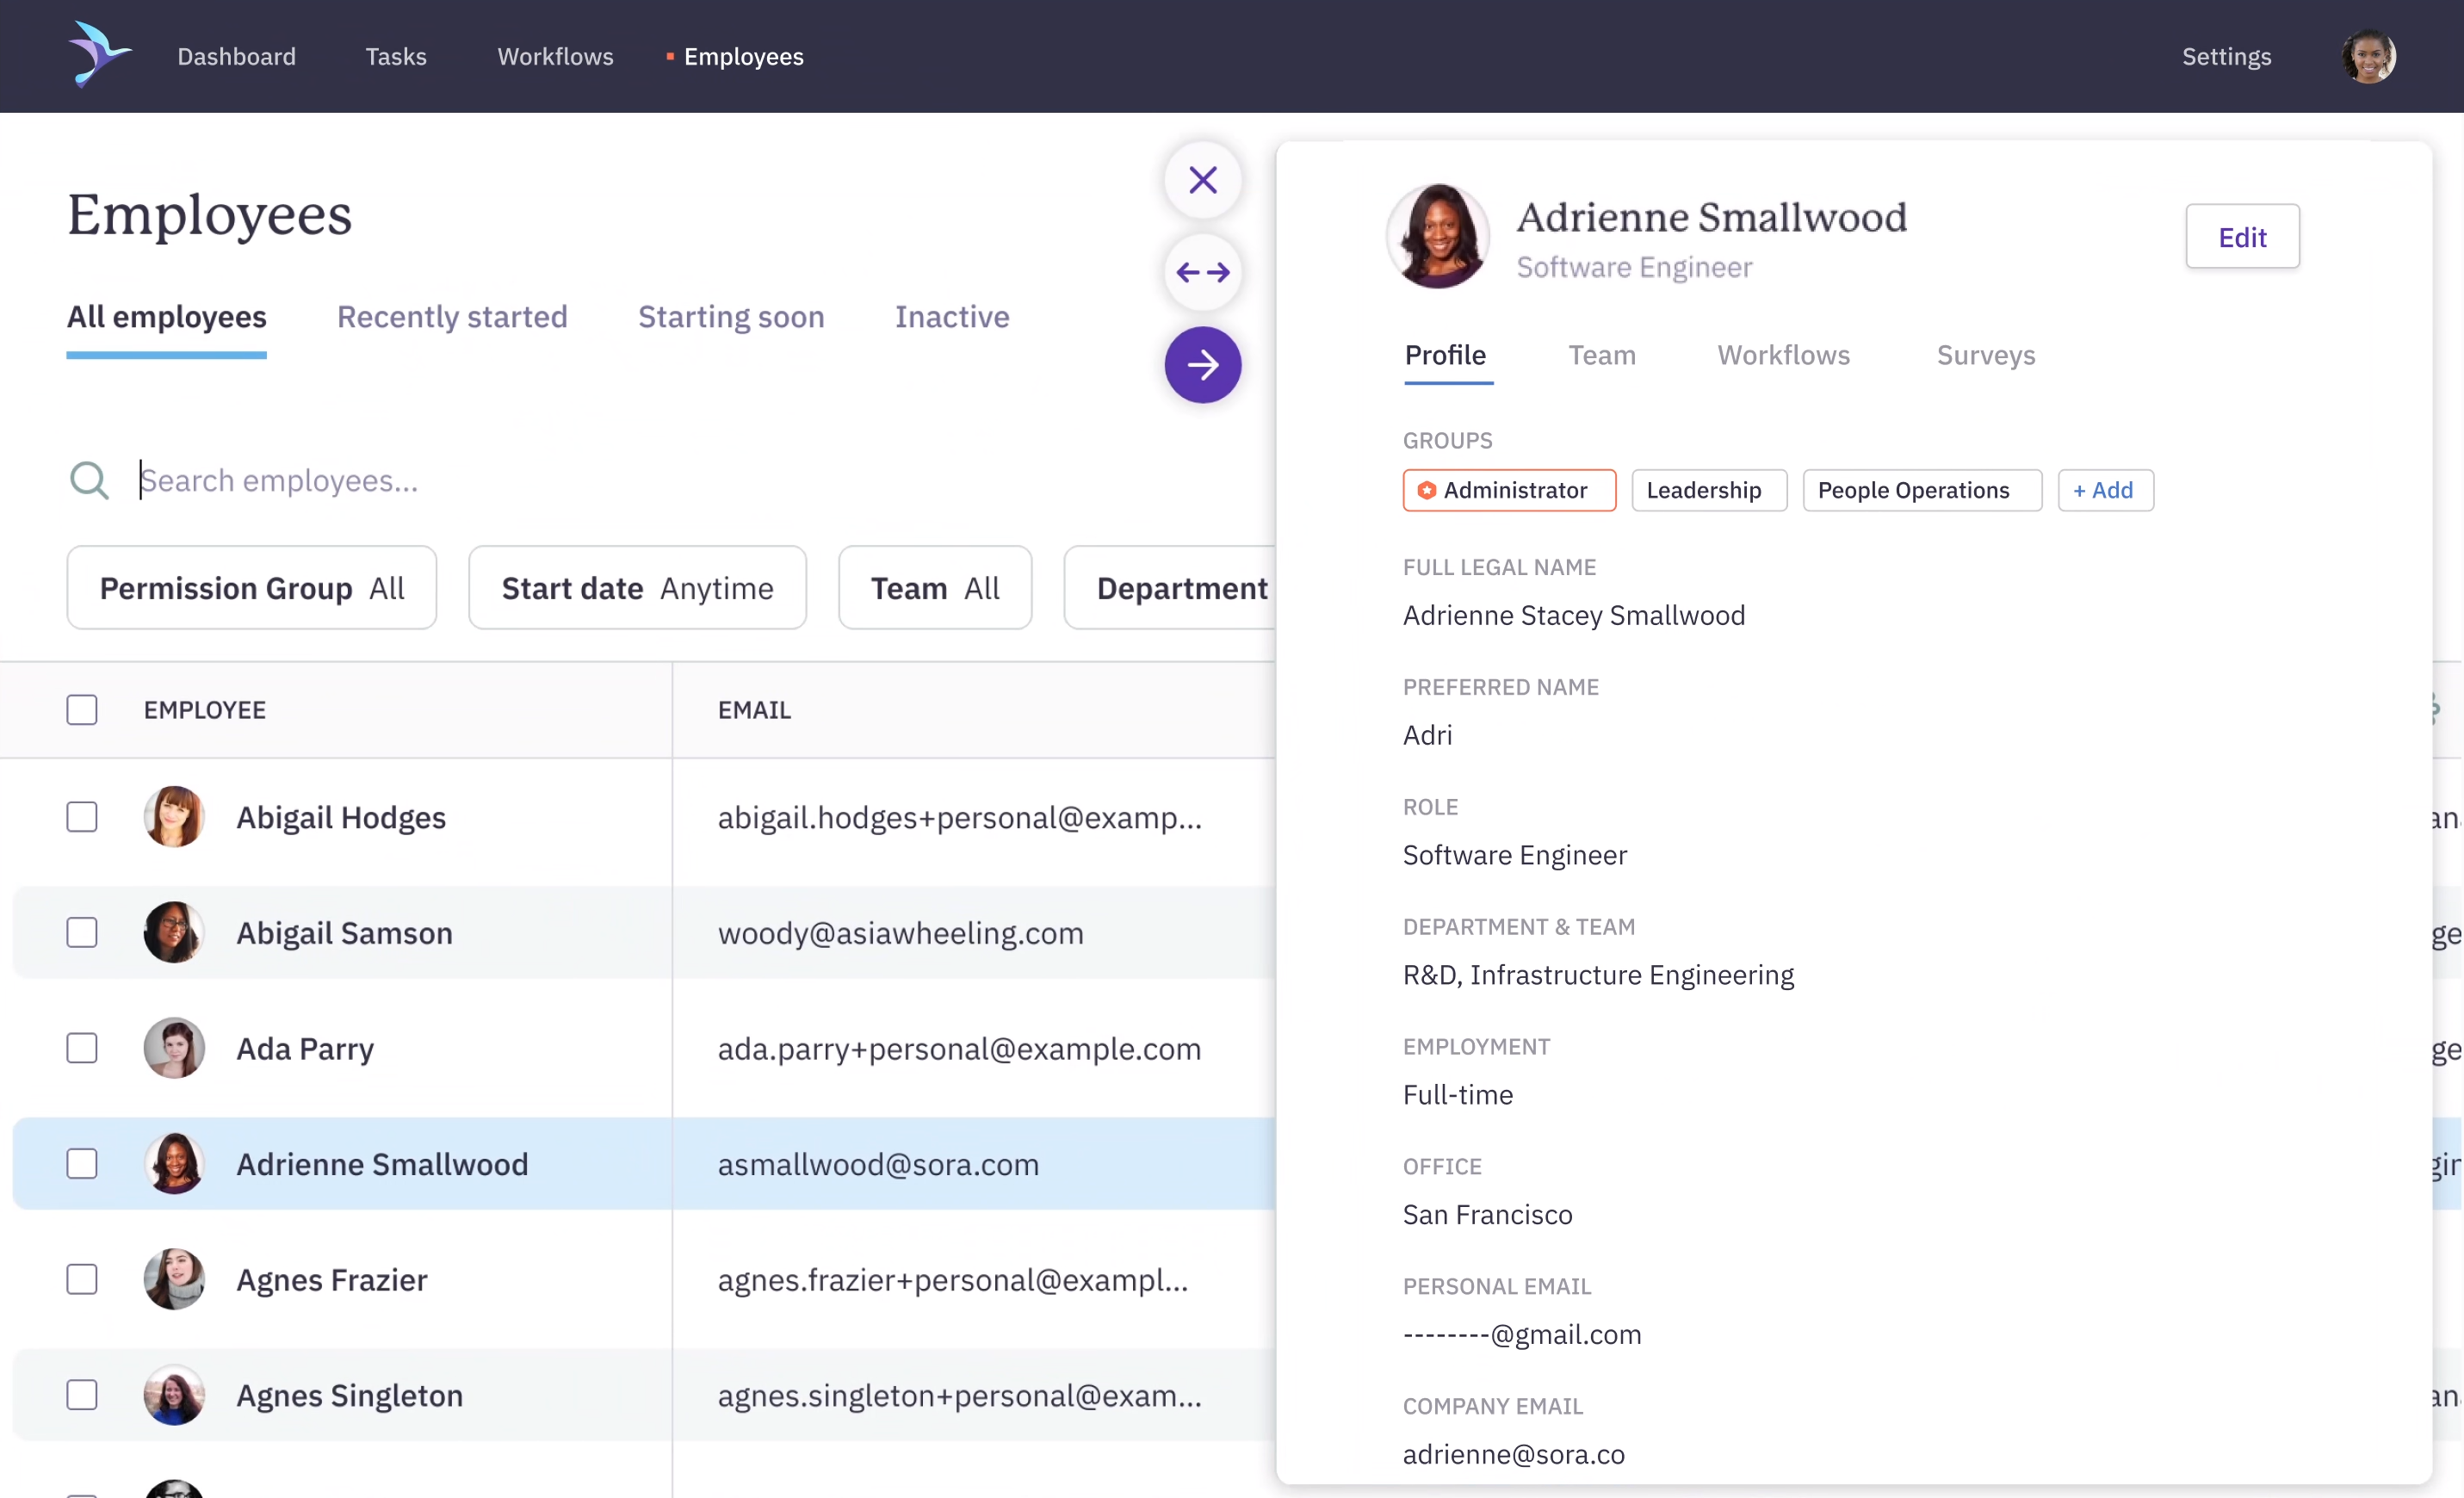 Manage all of your employee data in one view